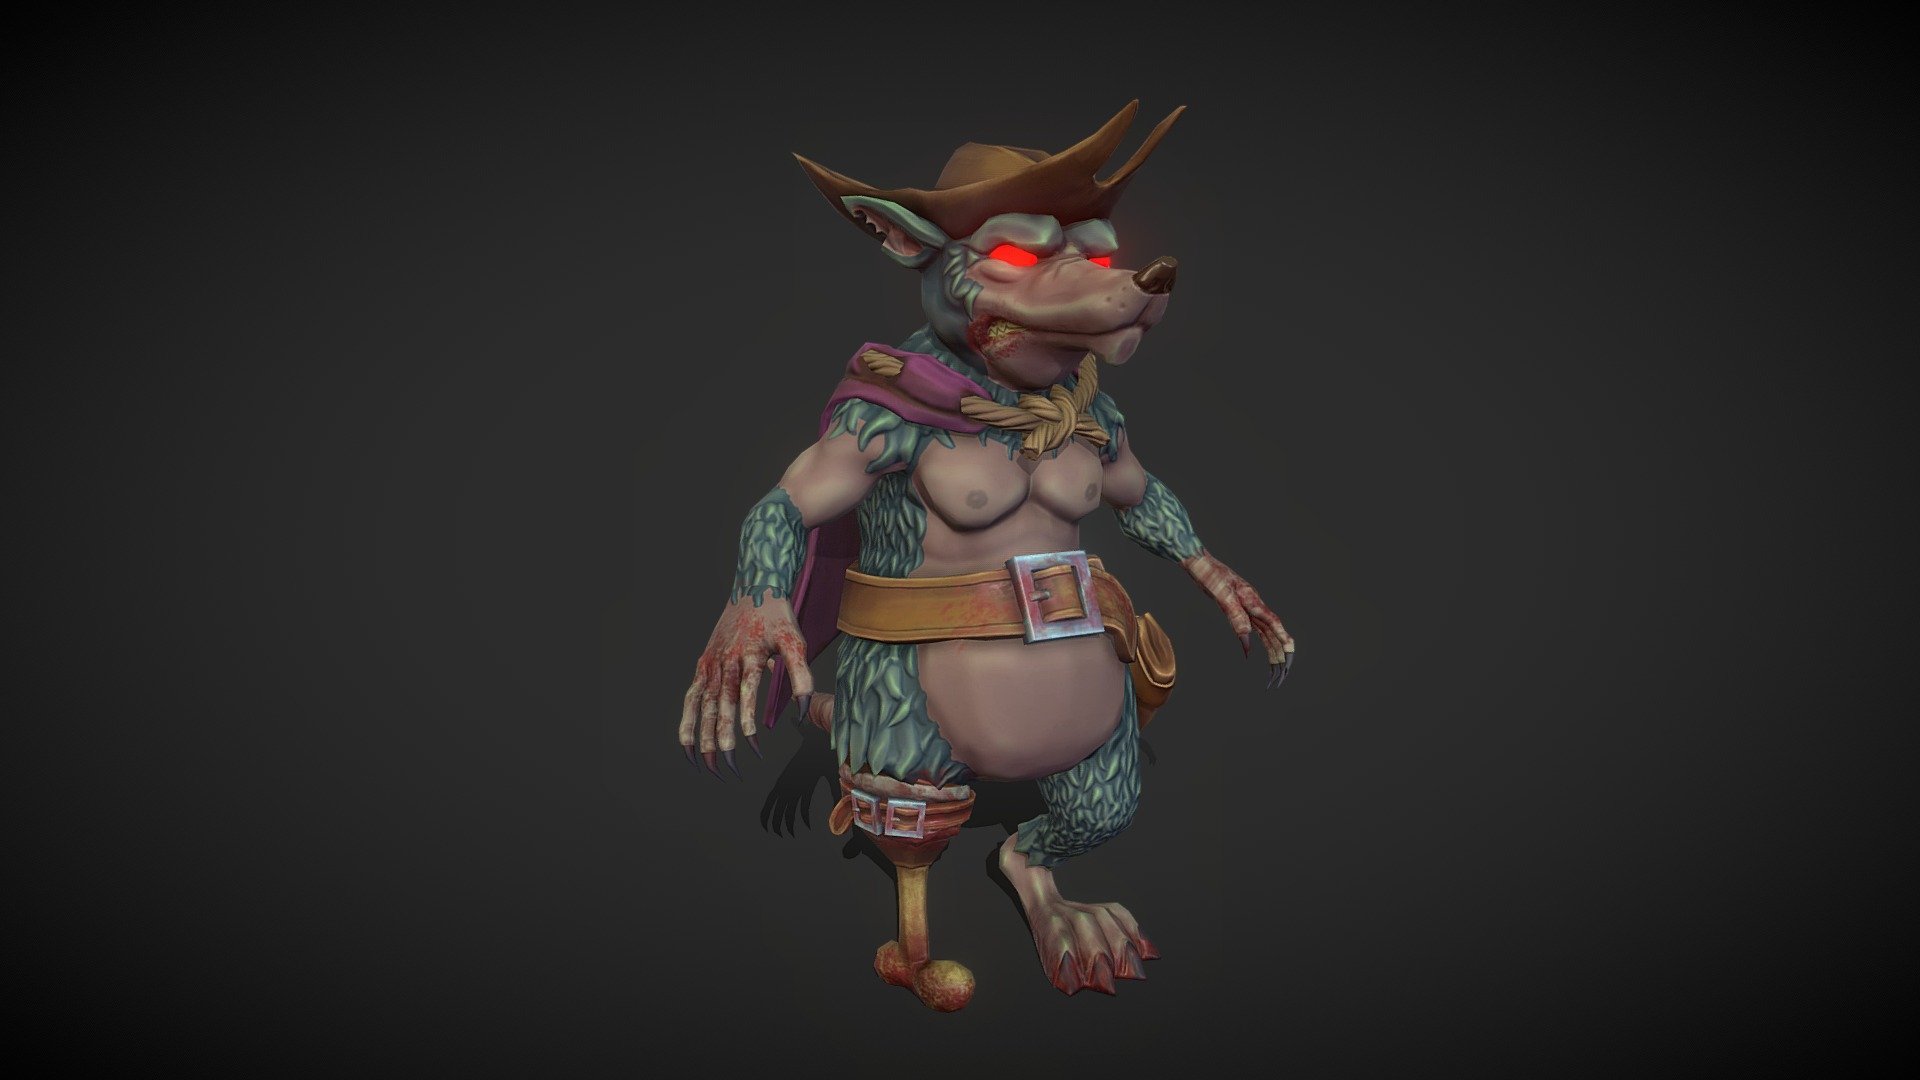 Cannibal Captain character for an ongoing personal project of mine. Going to be part of an animated scene inspired by Billy Talent's Ghost Ship of Cannibal Rats 3d model